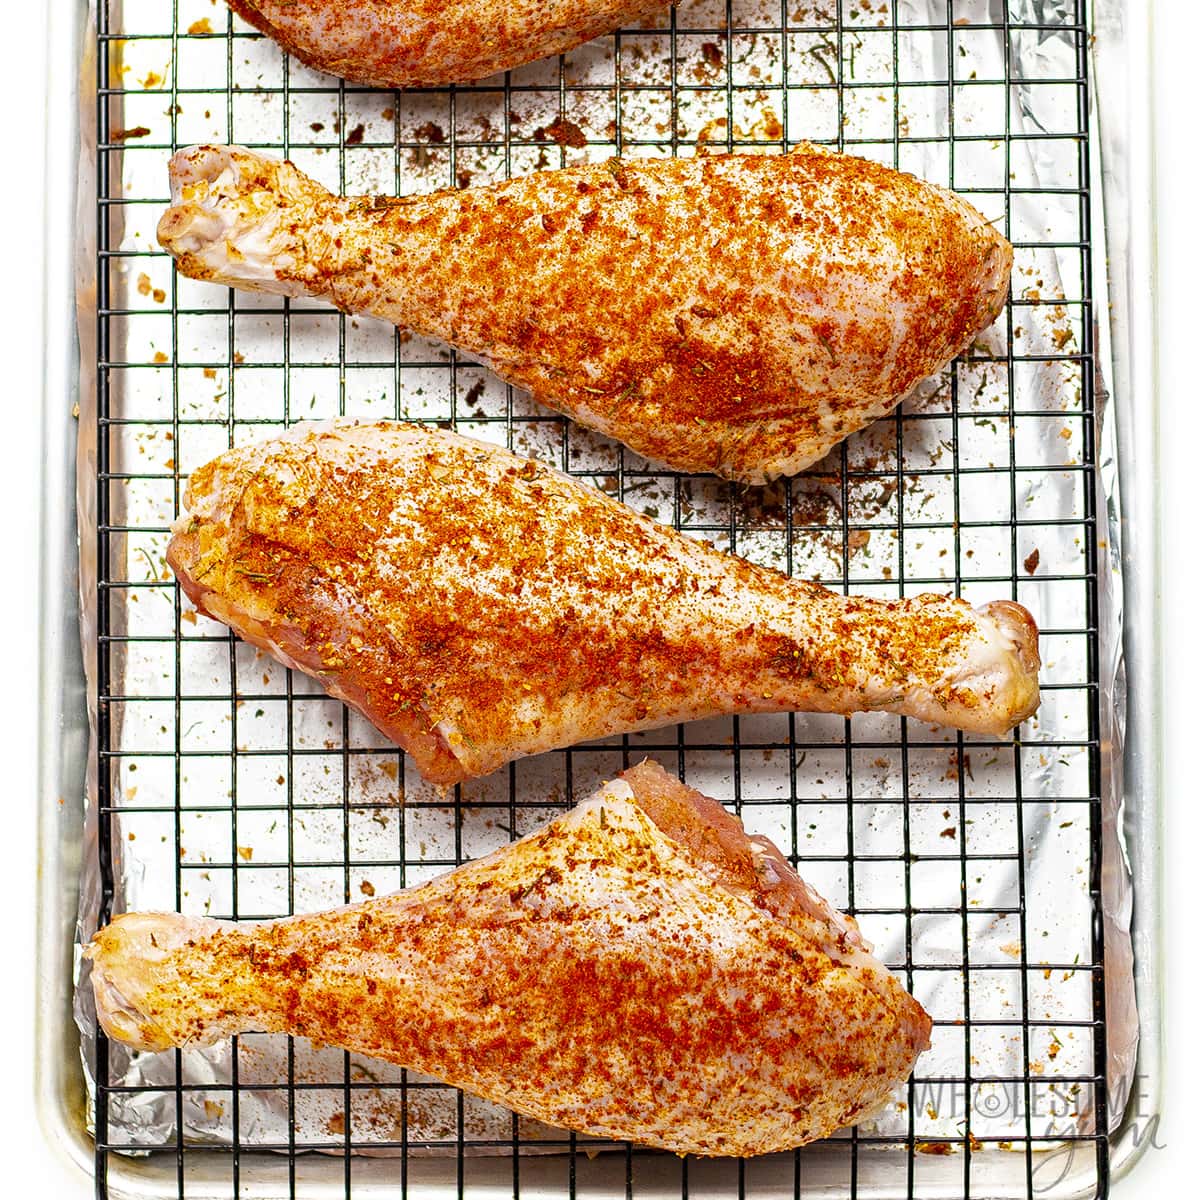 Poultry sprinkled with spices on baking rack.